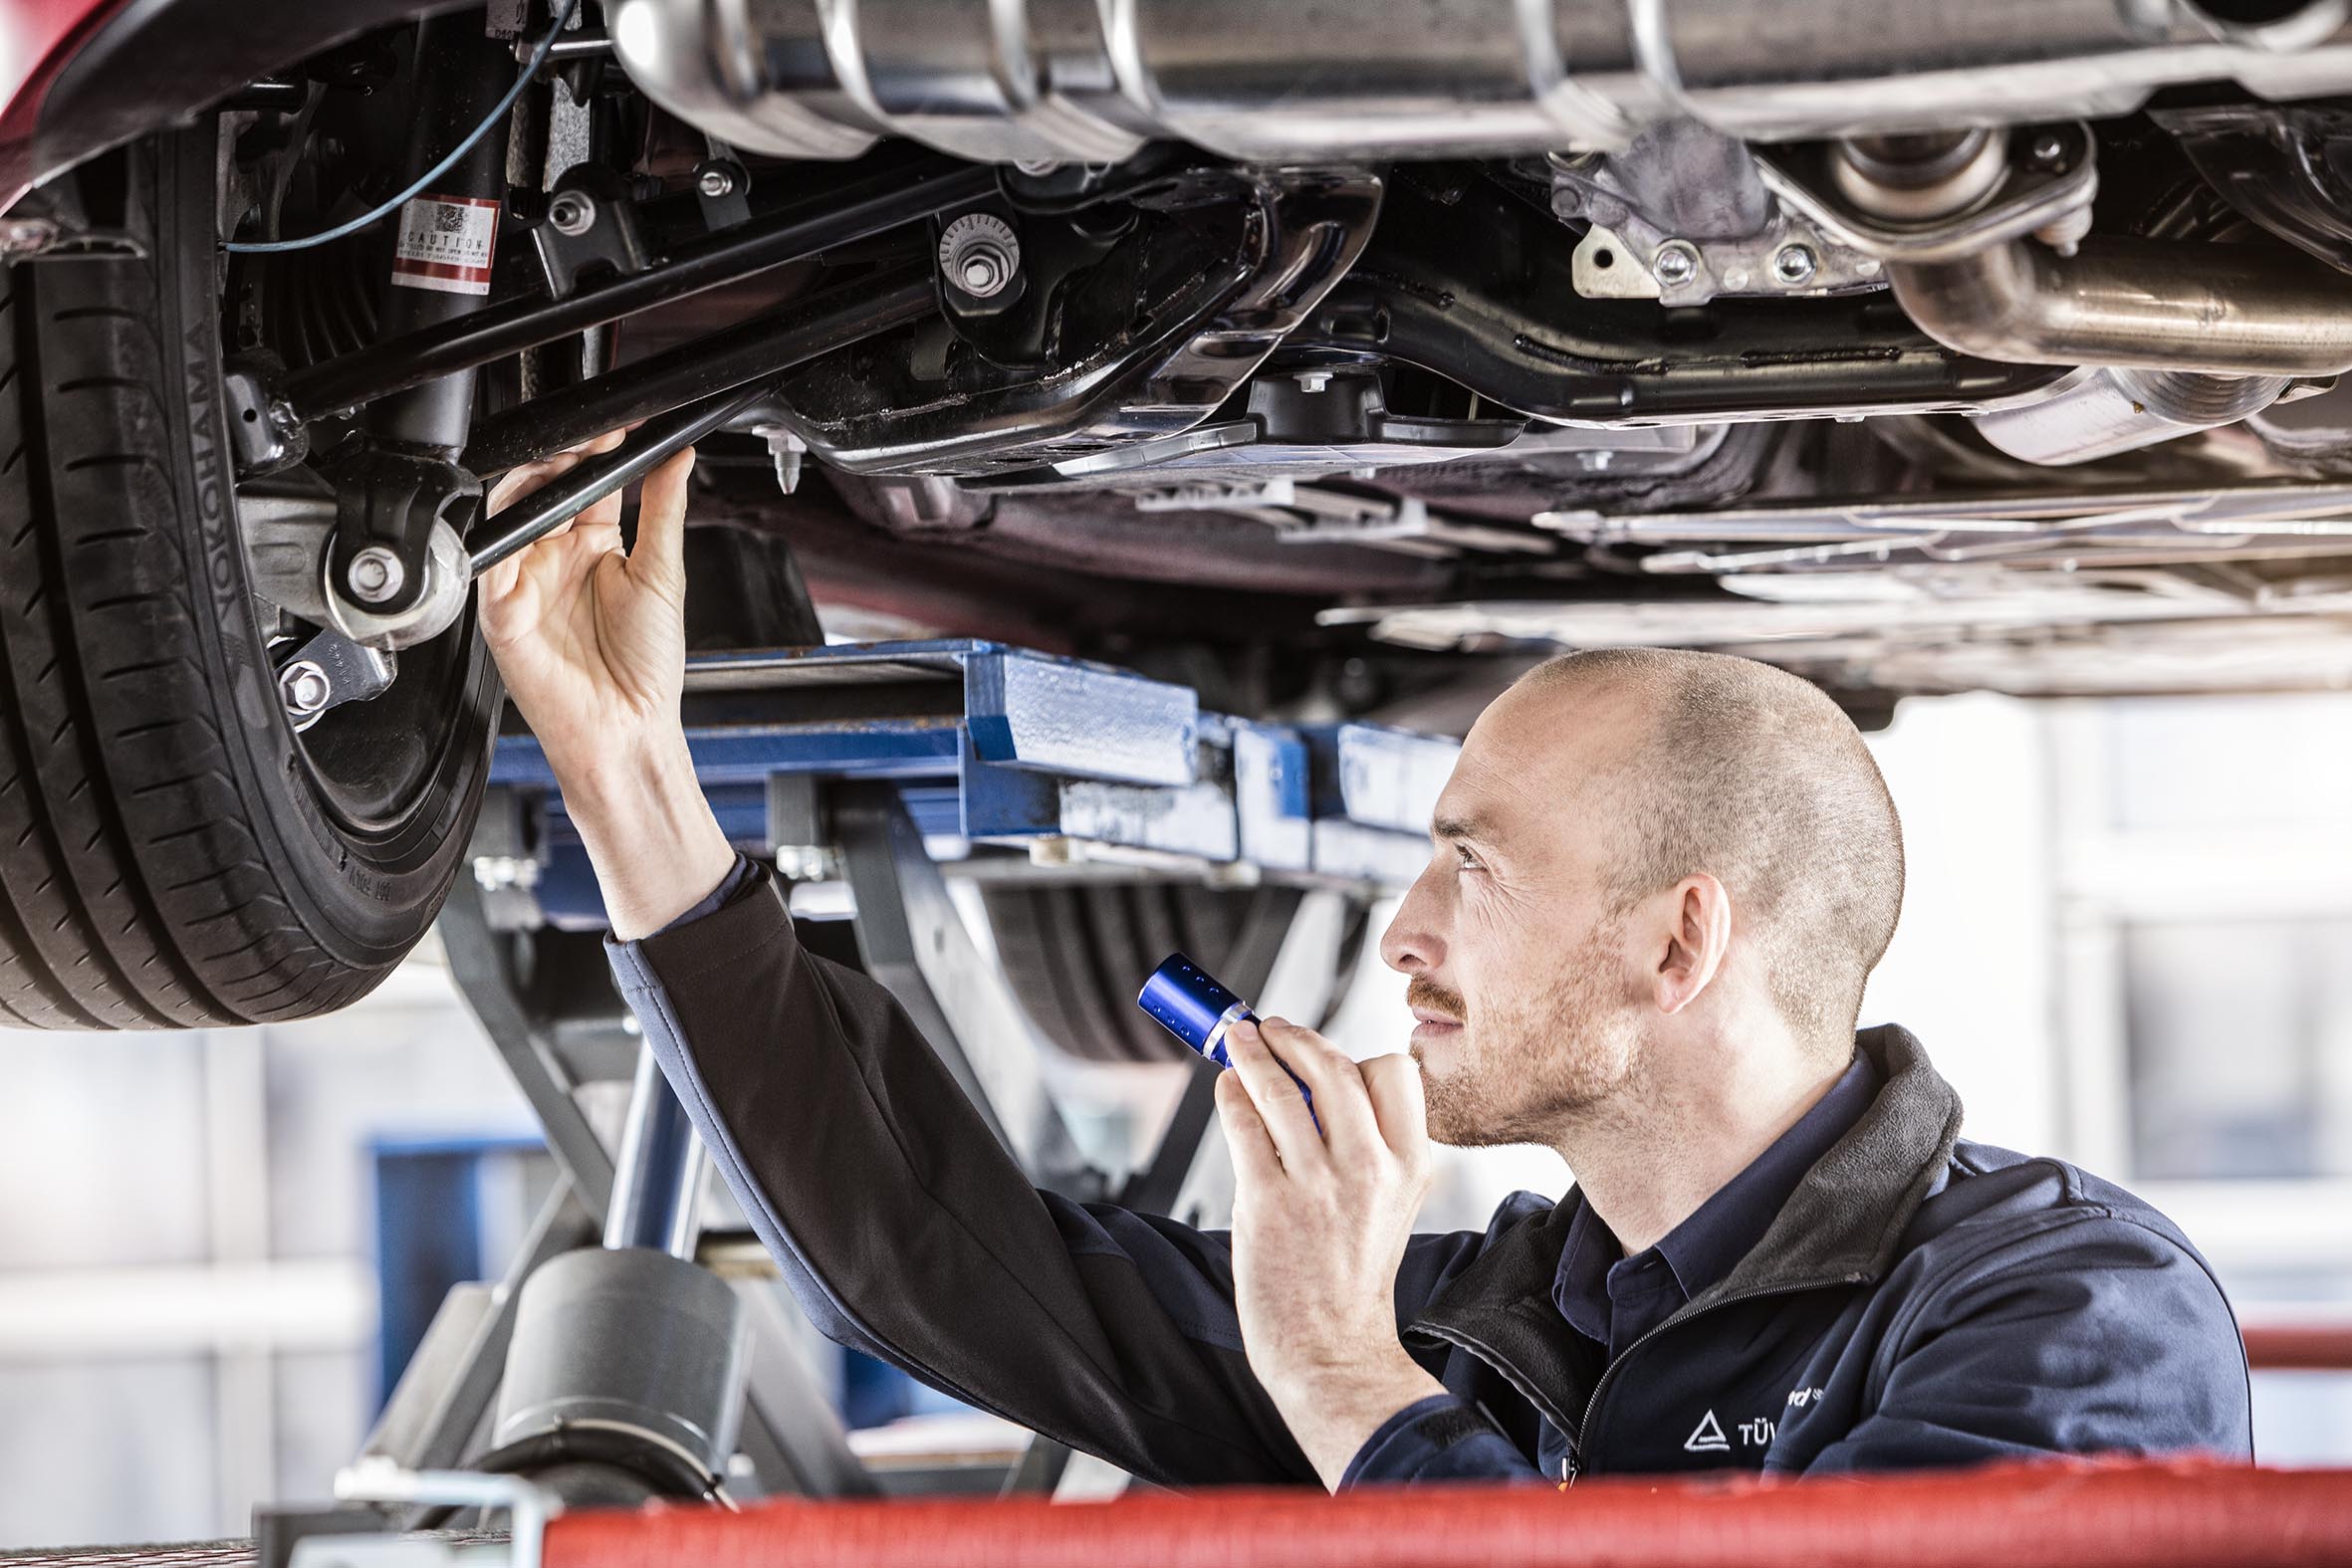 Car Inspection in Qatar: Is it credible?